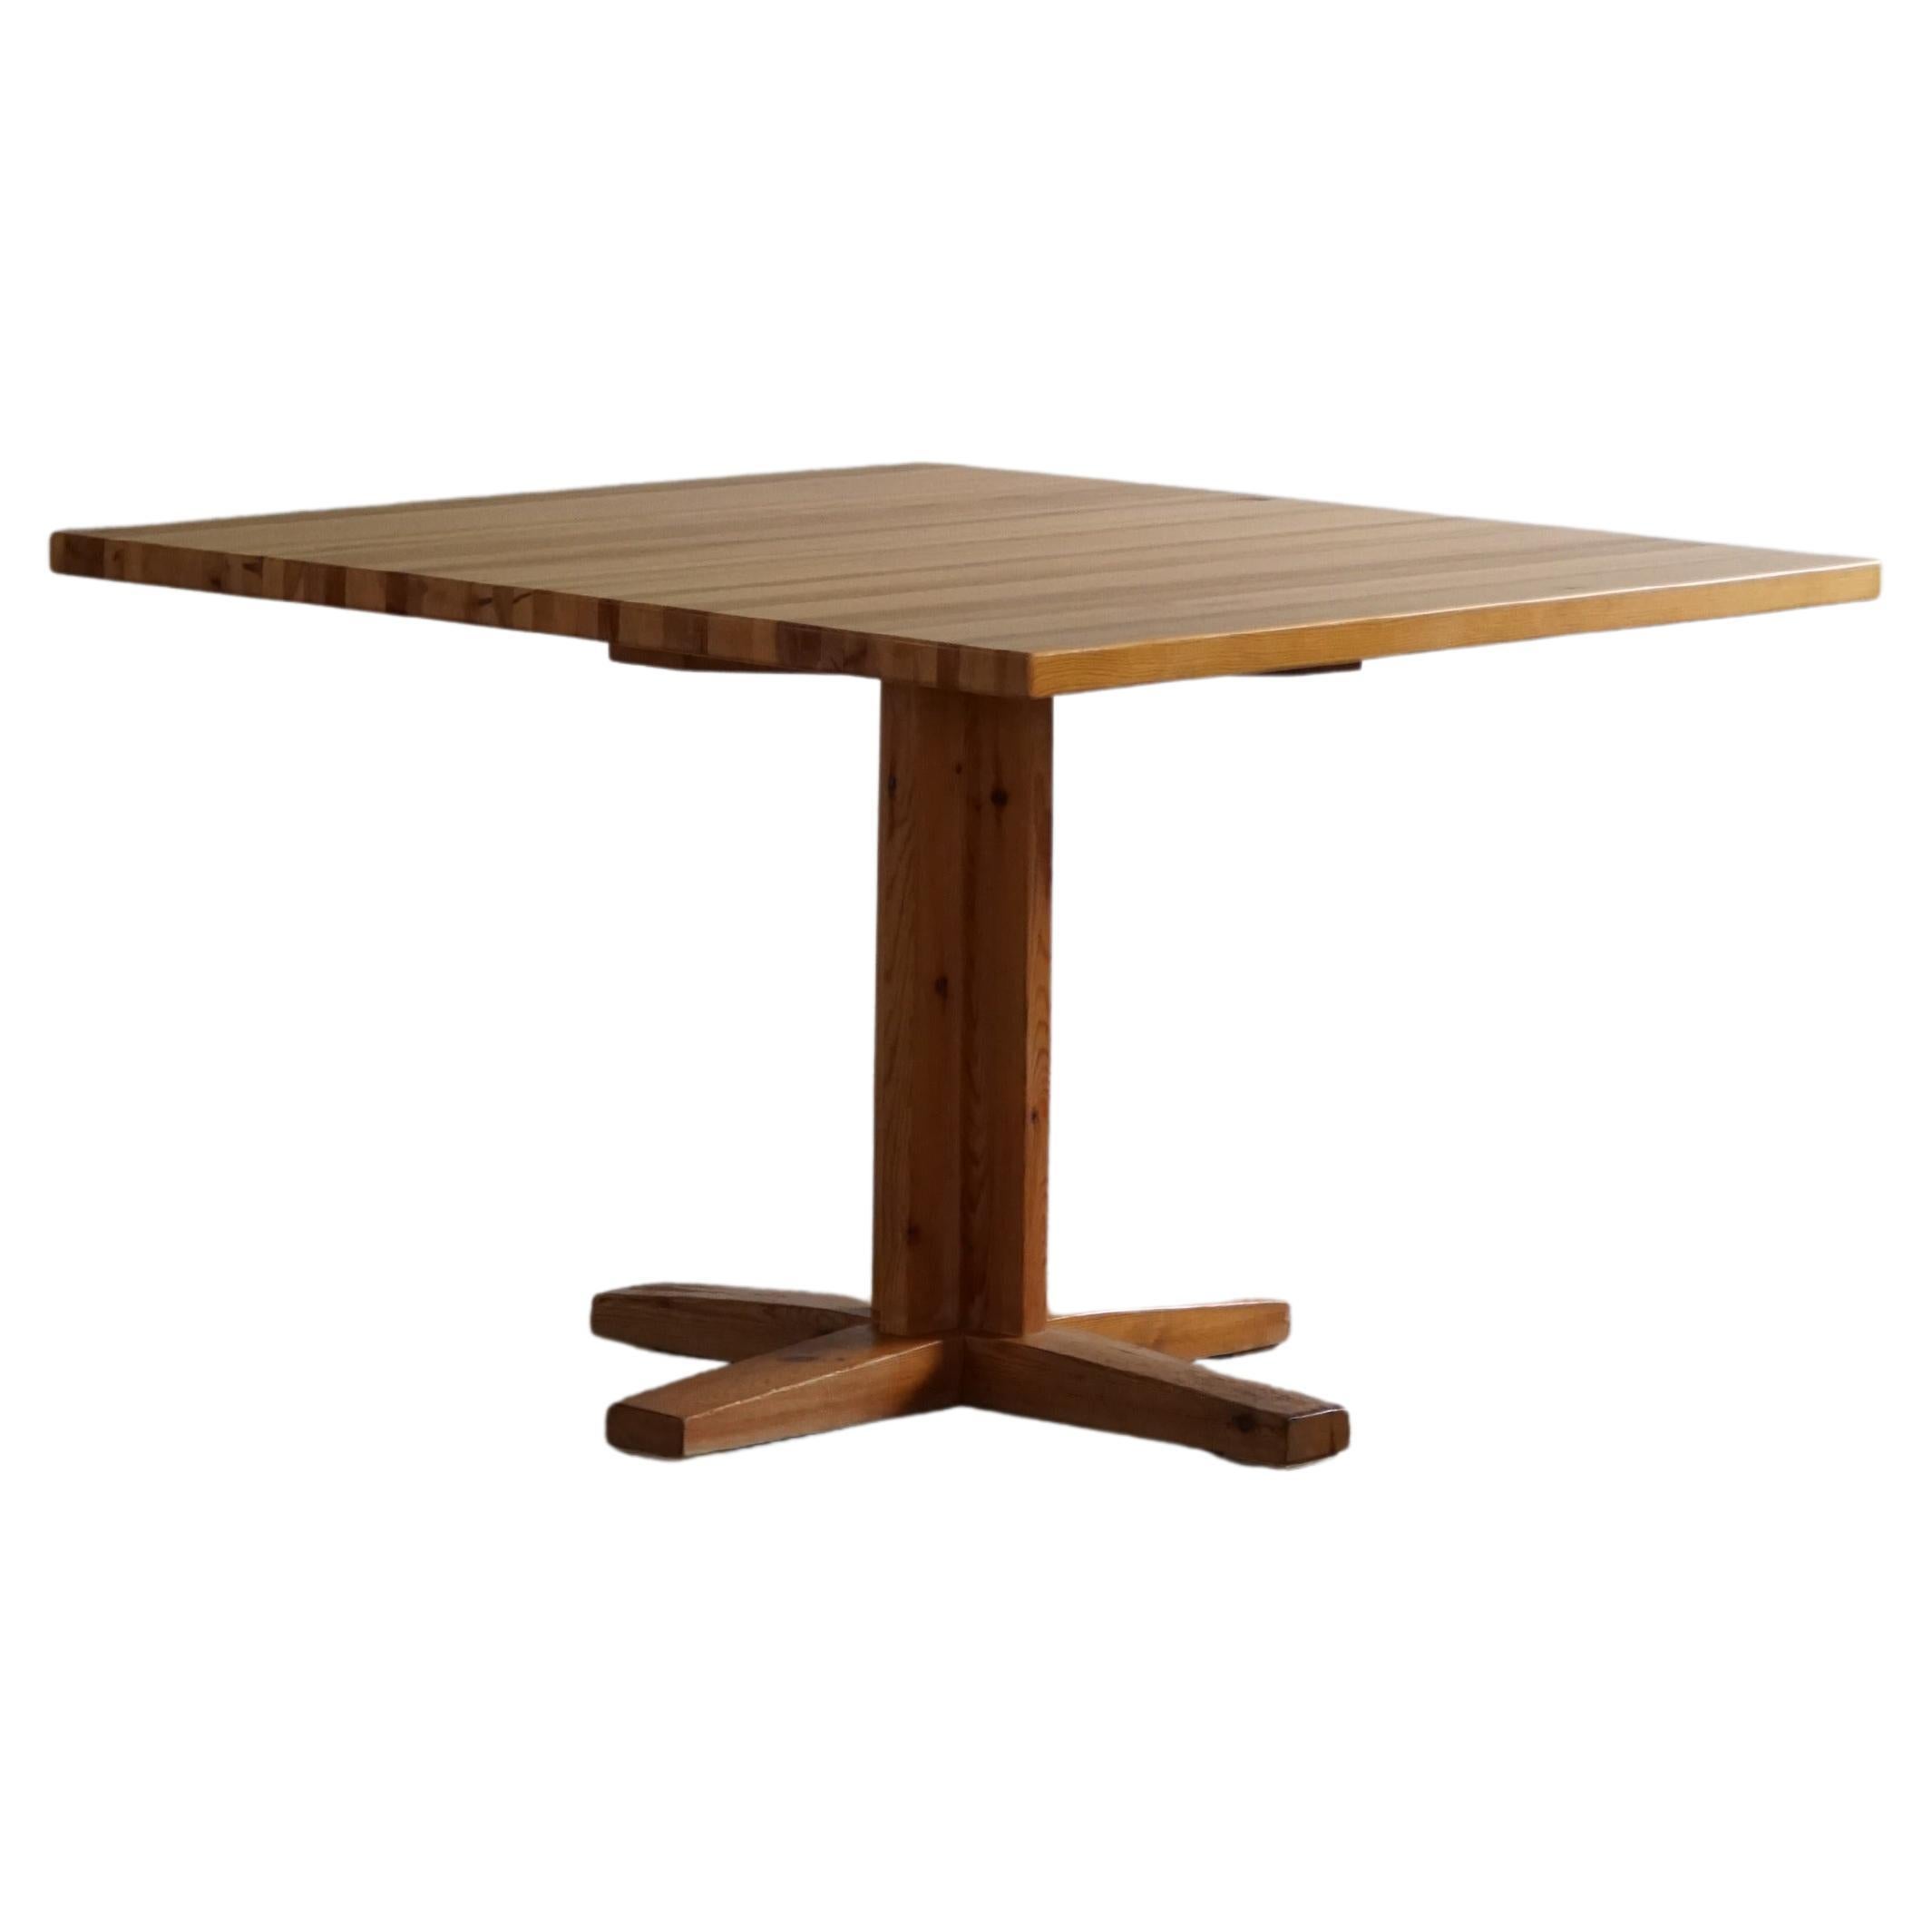 Midcentury Square Dining Room Table in Pine, Danish Cabinetmaker, 1970s